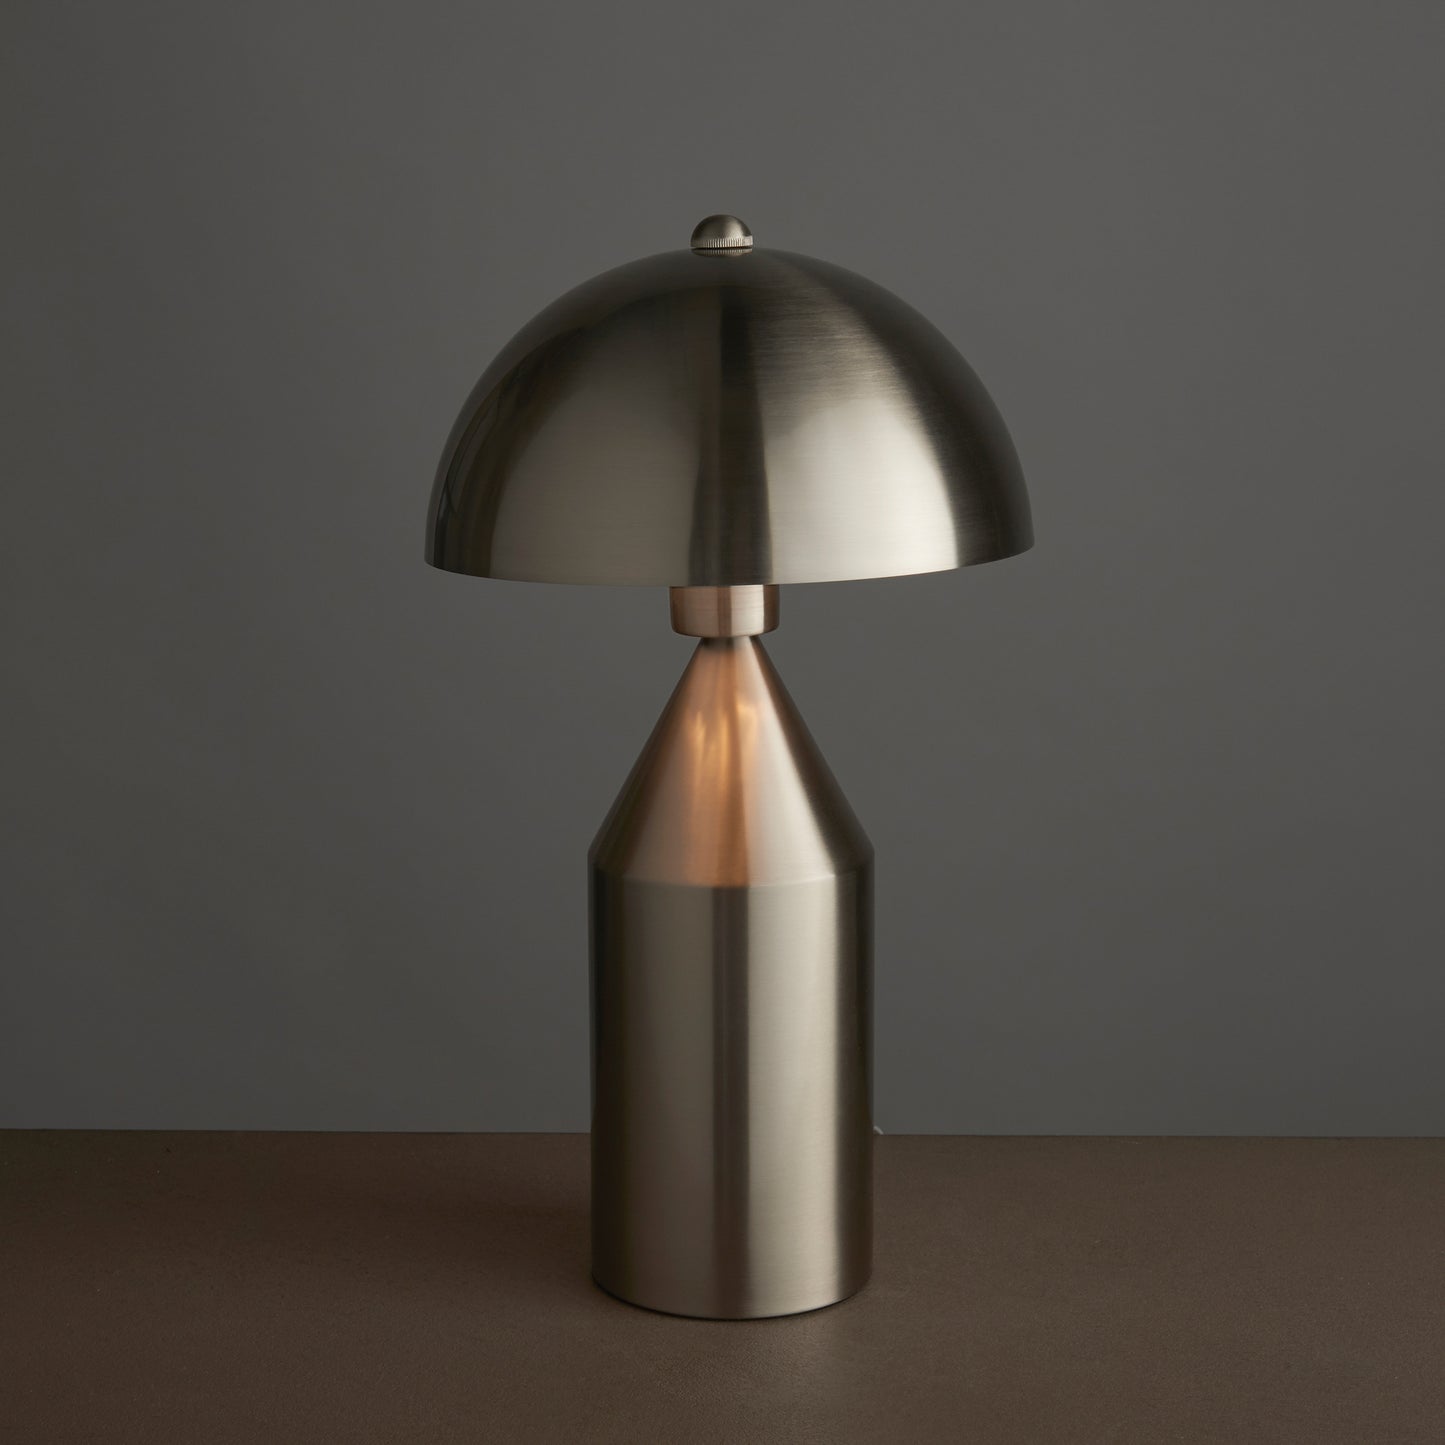 A Nova Table Lamp with a dome on top, perfect for interior decor and home furniture.